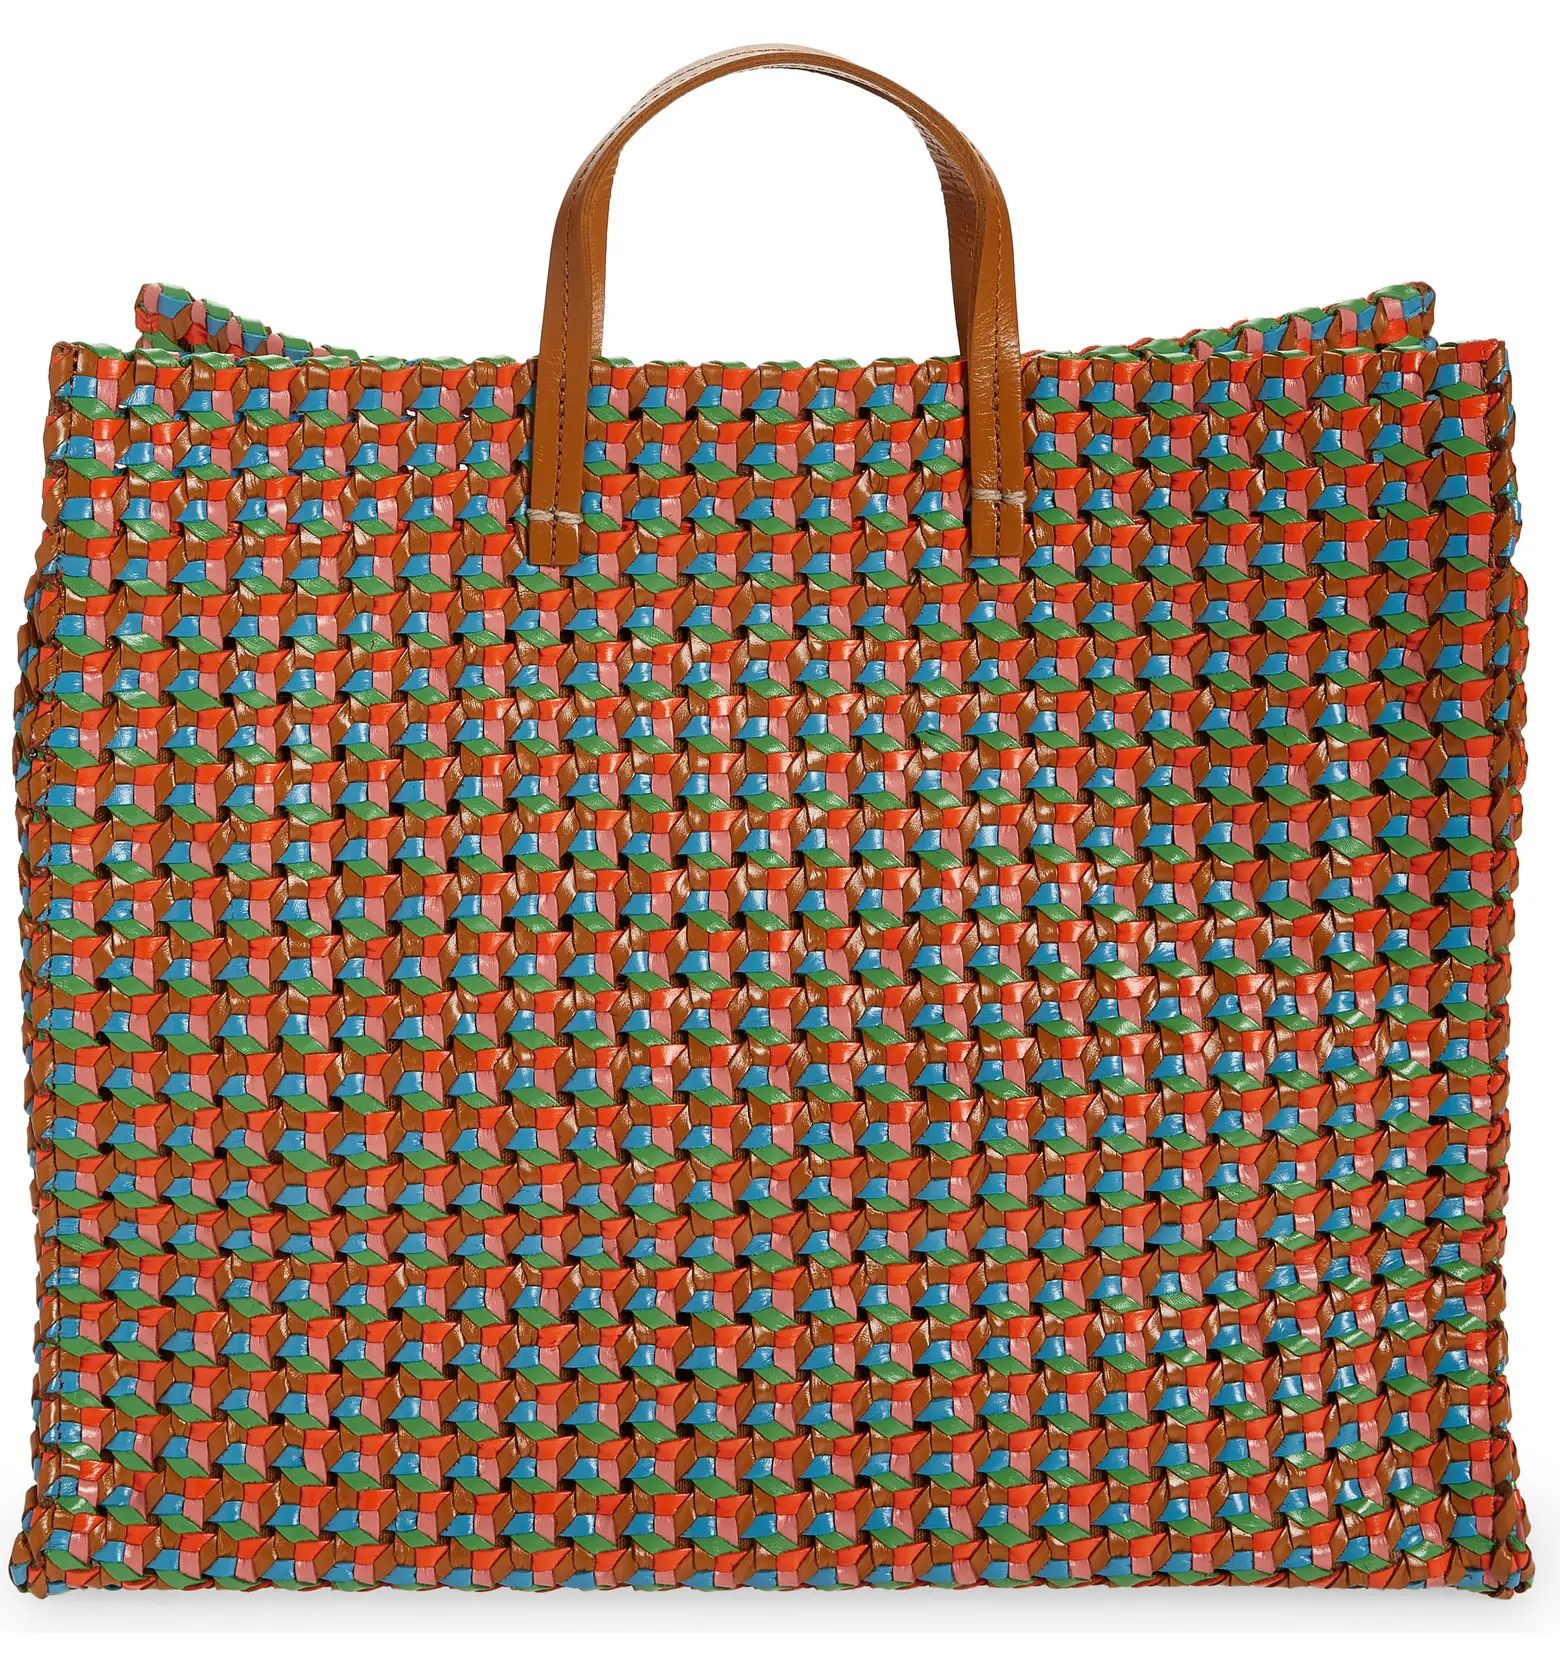 Clare V. Simple Woven Leather Tote | Nordstrom | Nordstrom